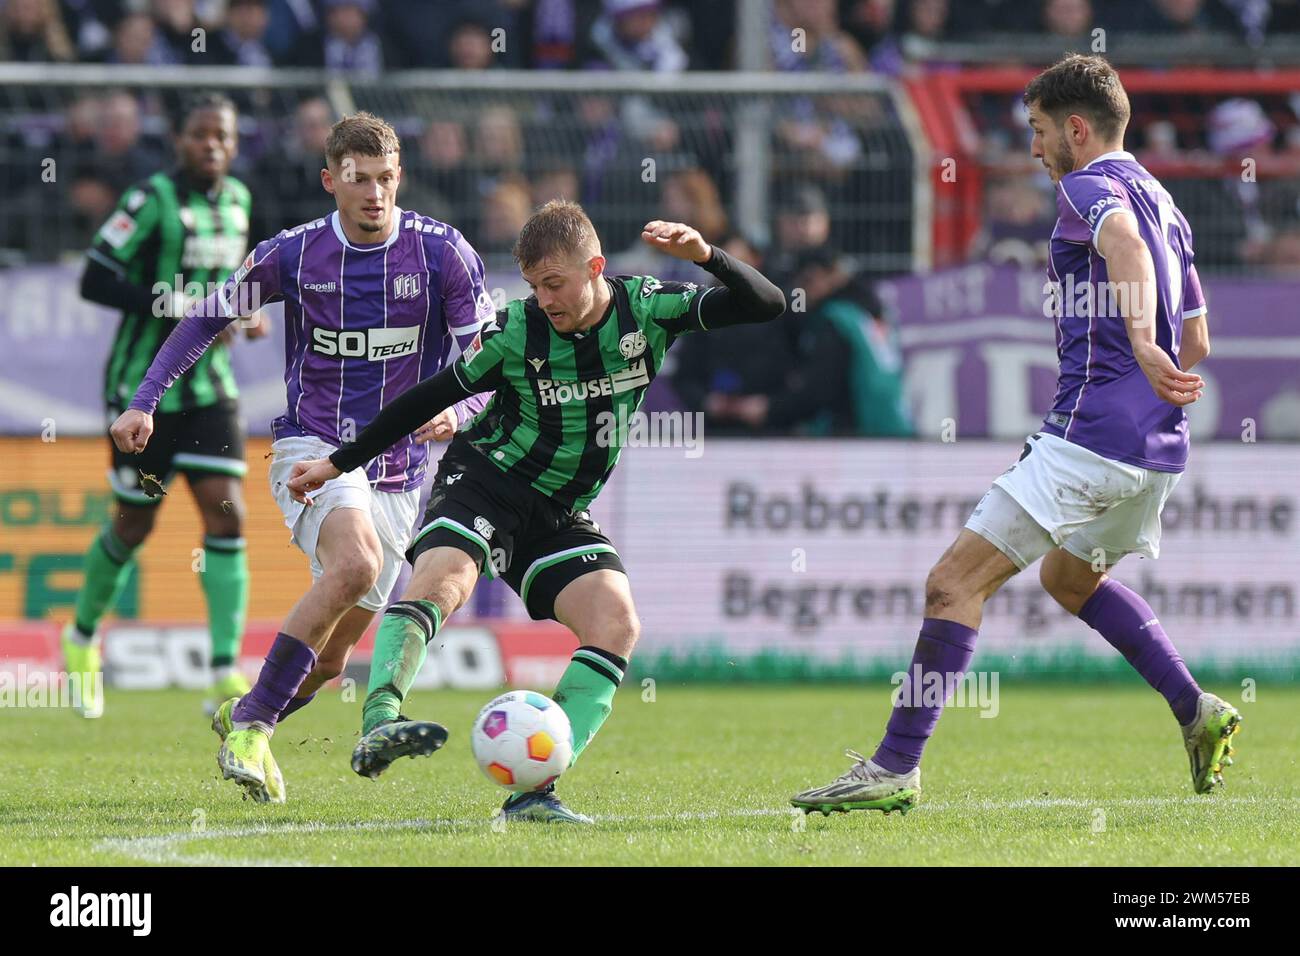 24 February 2024, Lower Saxony, Osnabrück: Soccer: Bundesliga 2, VfL Osnabrück - Hannover 96, matchday 23 at the Stadion an der Bremer Brücke. Osnabrück's Michael Cuisance (l) and Bashkim Ajdini (r) battle for the ball with Hannover's Sebastian Ernst (M). Photo: Friso Gentsch/dpa - IMPORTANT NOTE: In accordance with the regulations of the DFL German Football League and the DFB German Football Association, it is prohibited to utilize or have utilized photographs taken in the stadium and/or of the match in the form of sequential images and/or video-like photo series. Stock Photo